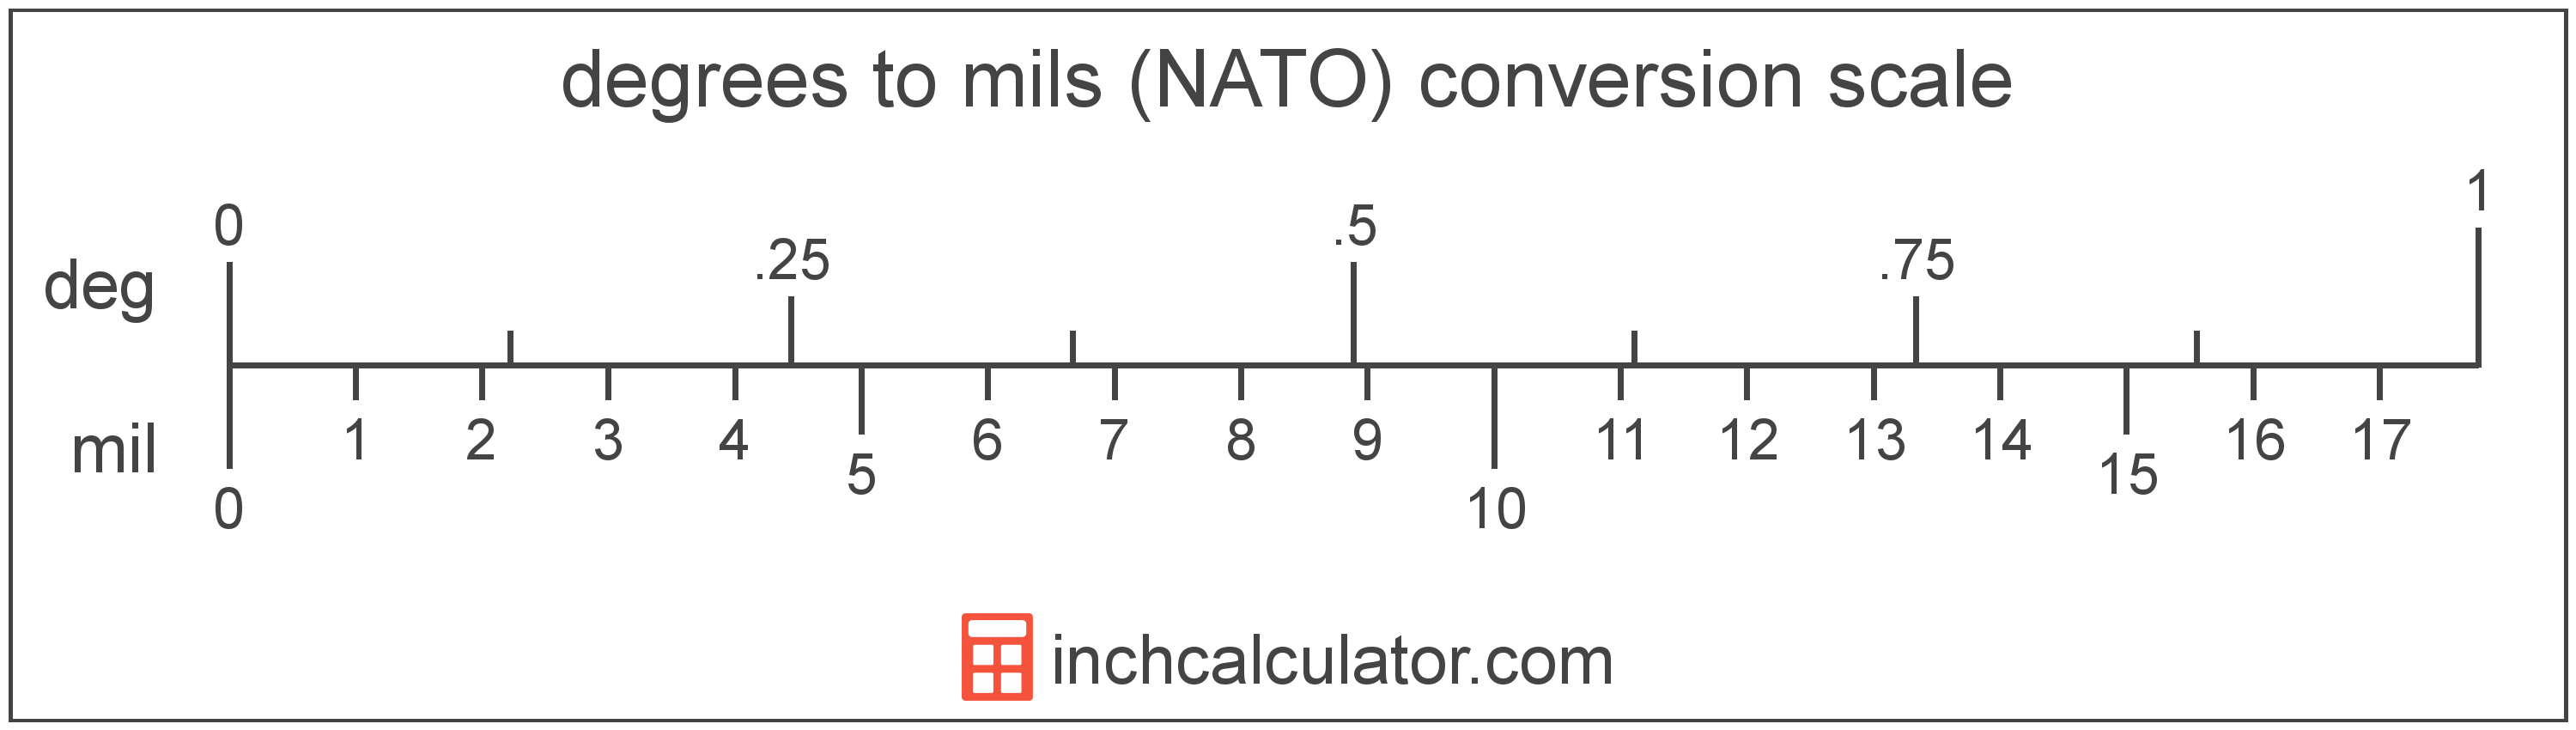 conversion scale showing degrees and equivalent mils angle values